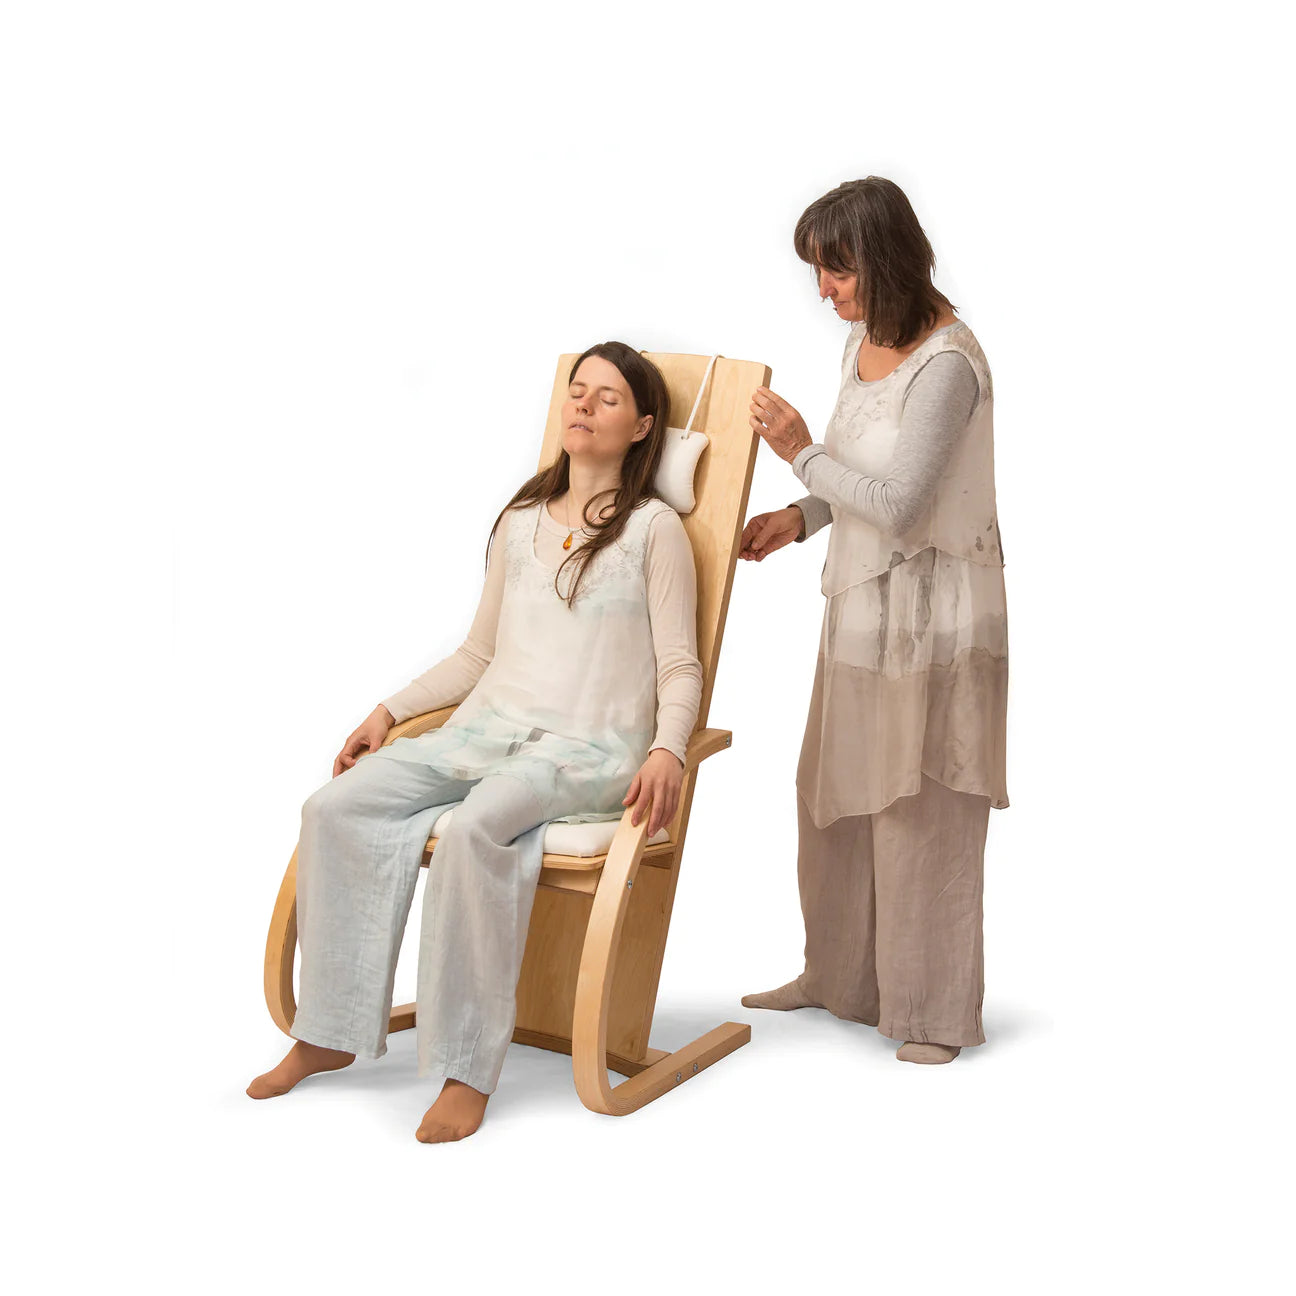 A woman sitting on a feeltone Monchair, a musical chair with strings attached to the back allowing full body experience of sound. Another woman is standing behind to chair and playing the strings. | weplaywelltogether